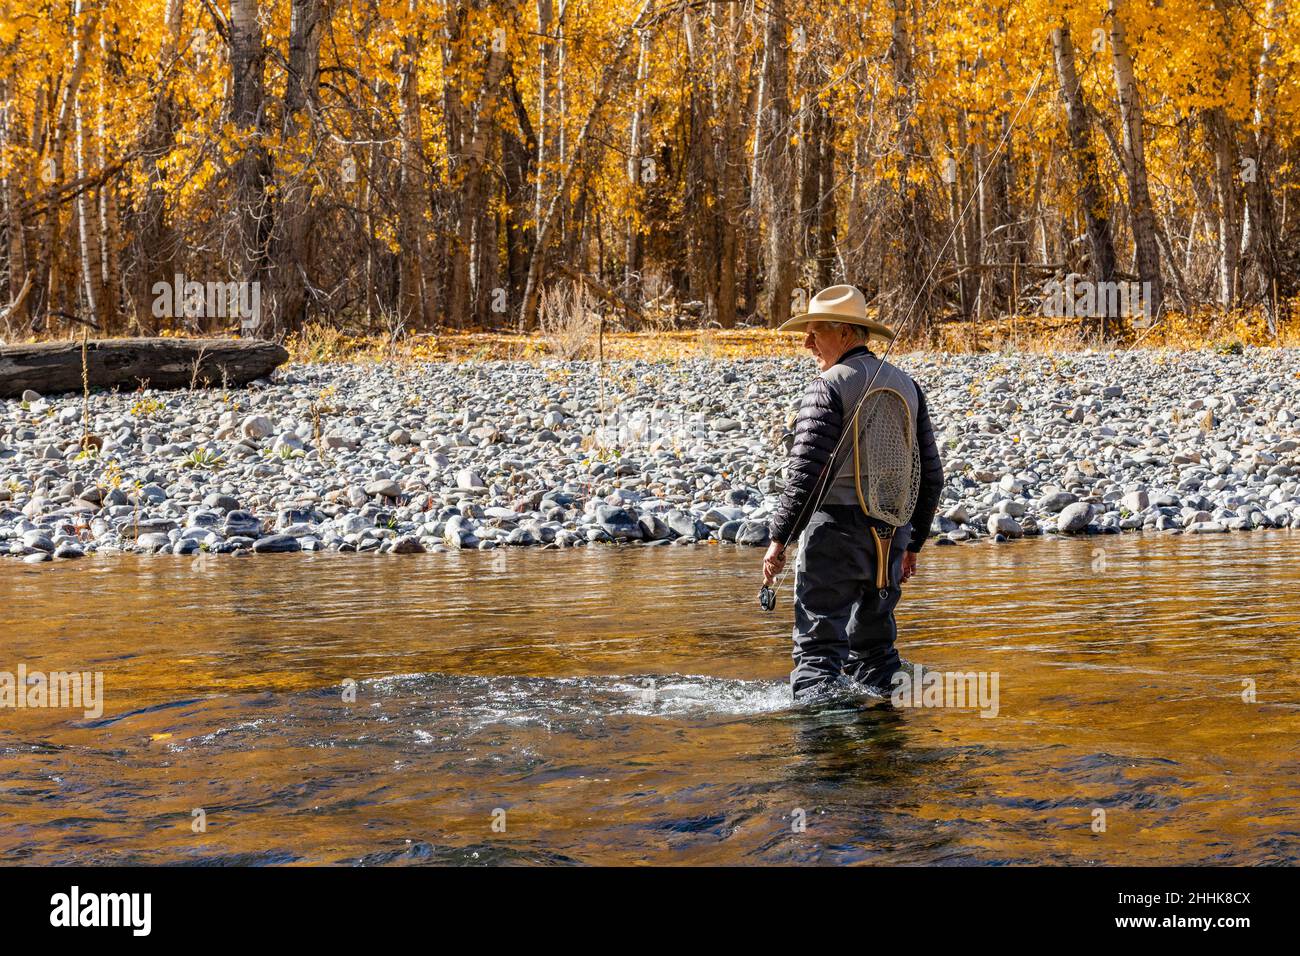 USA, Idaho, Bellevue, Rear view of senior fisherman wading in Big Wood River in Autumn Stock Photo